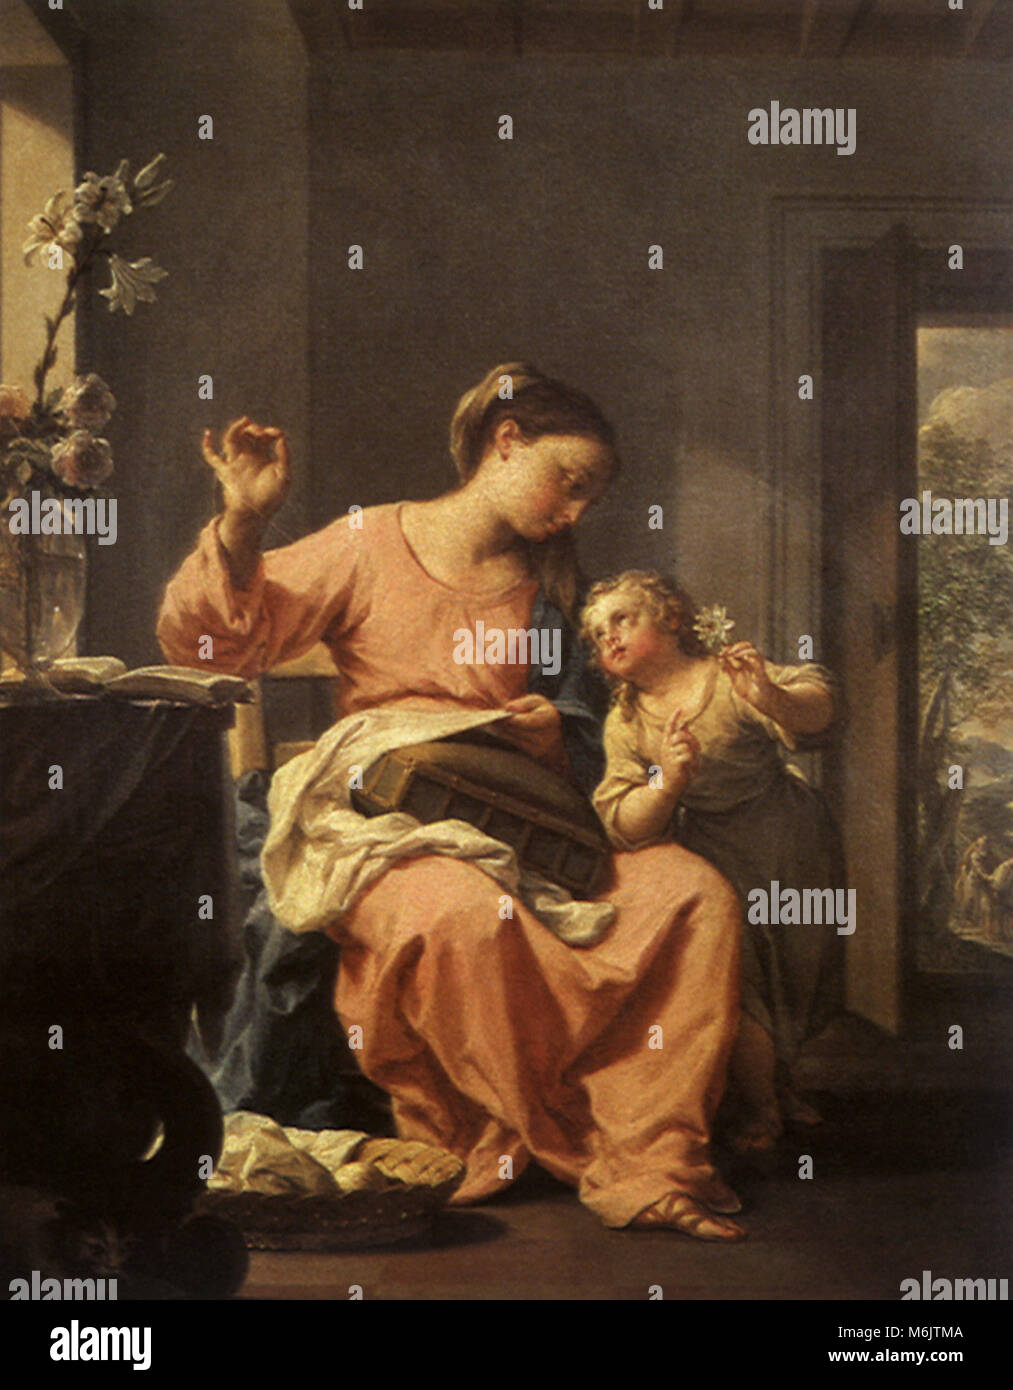 Madonna Sewing with Child, Trevisani, Francesco, or Il Ro, 1695. Stock Photo